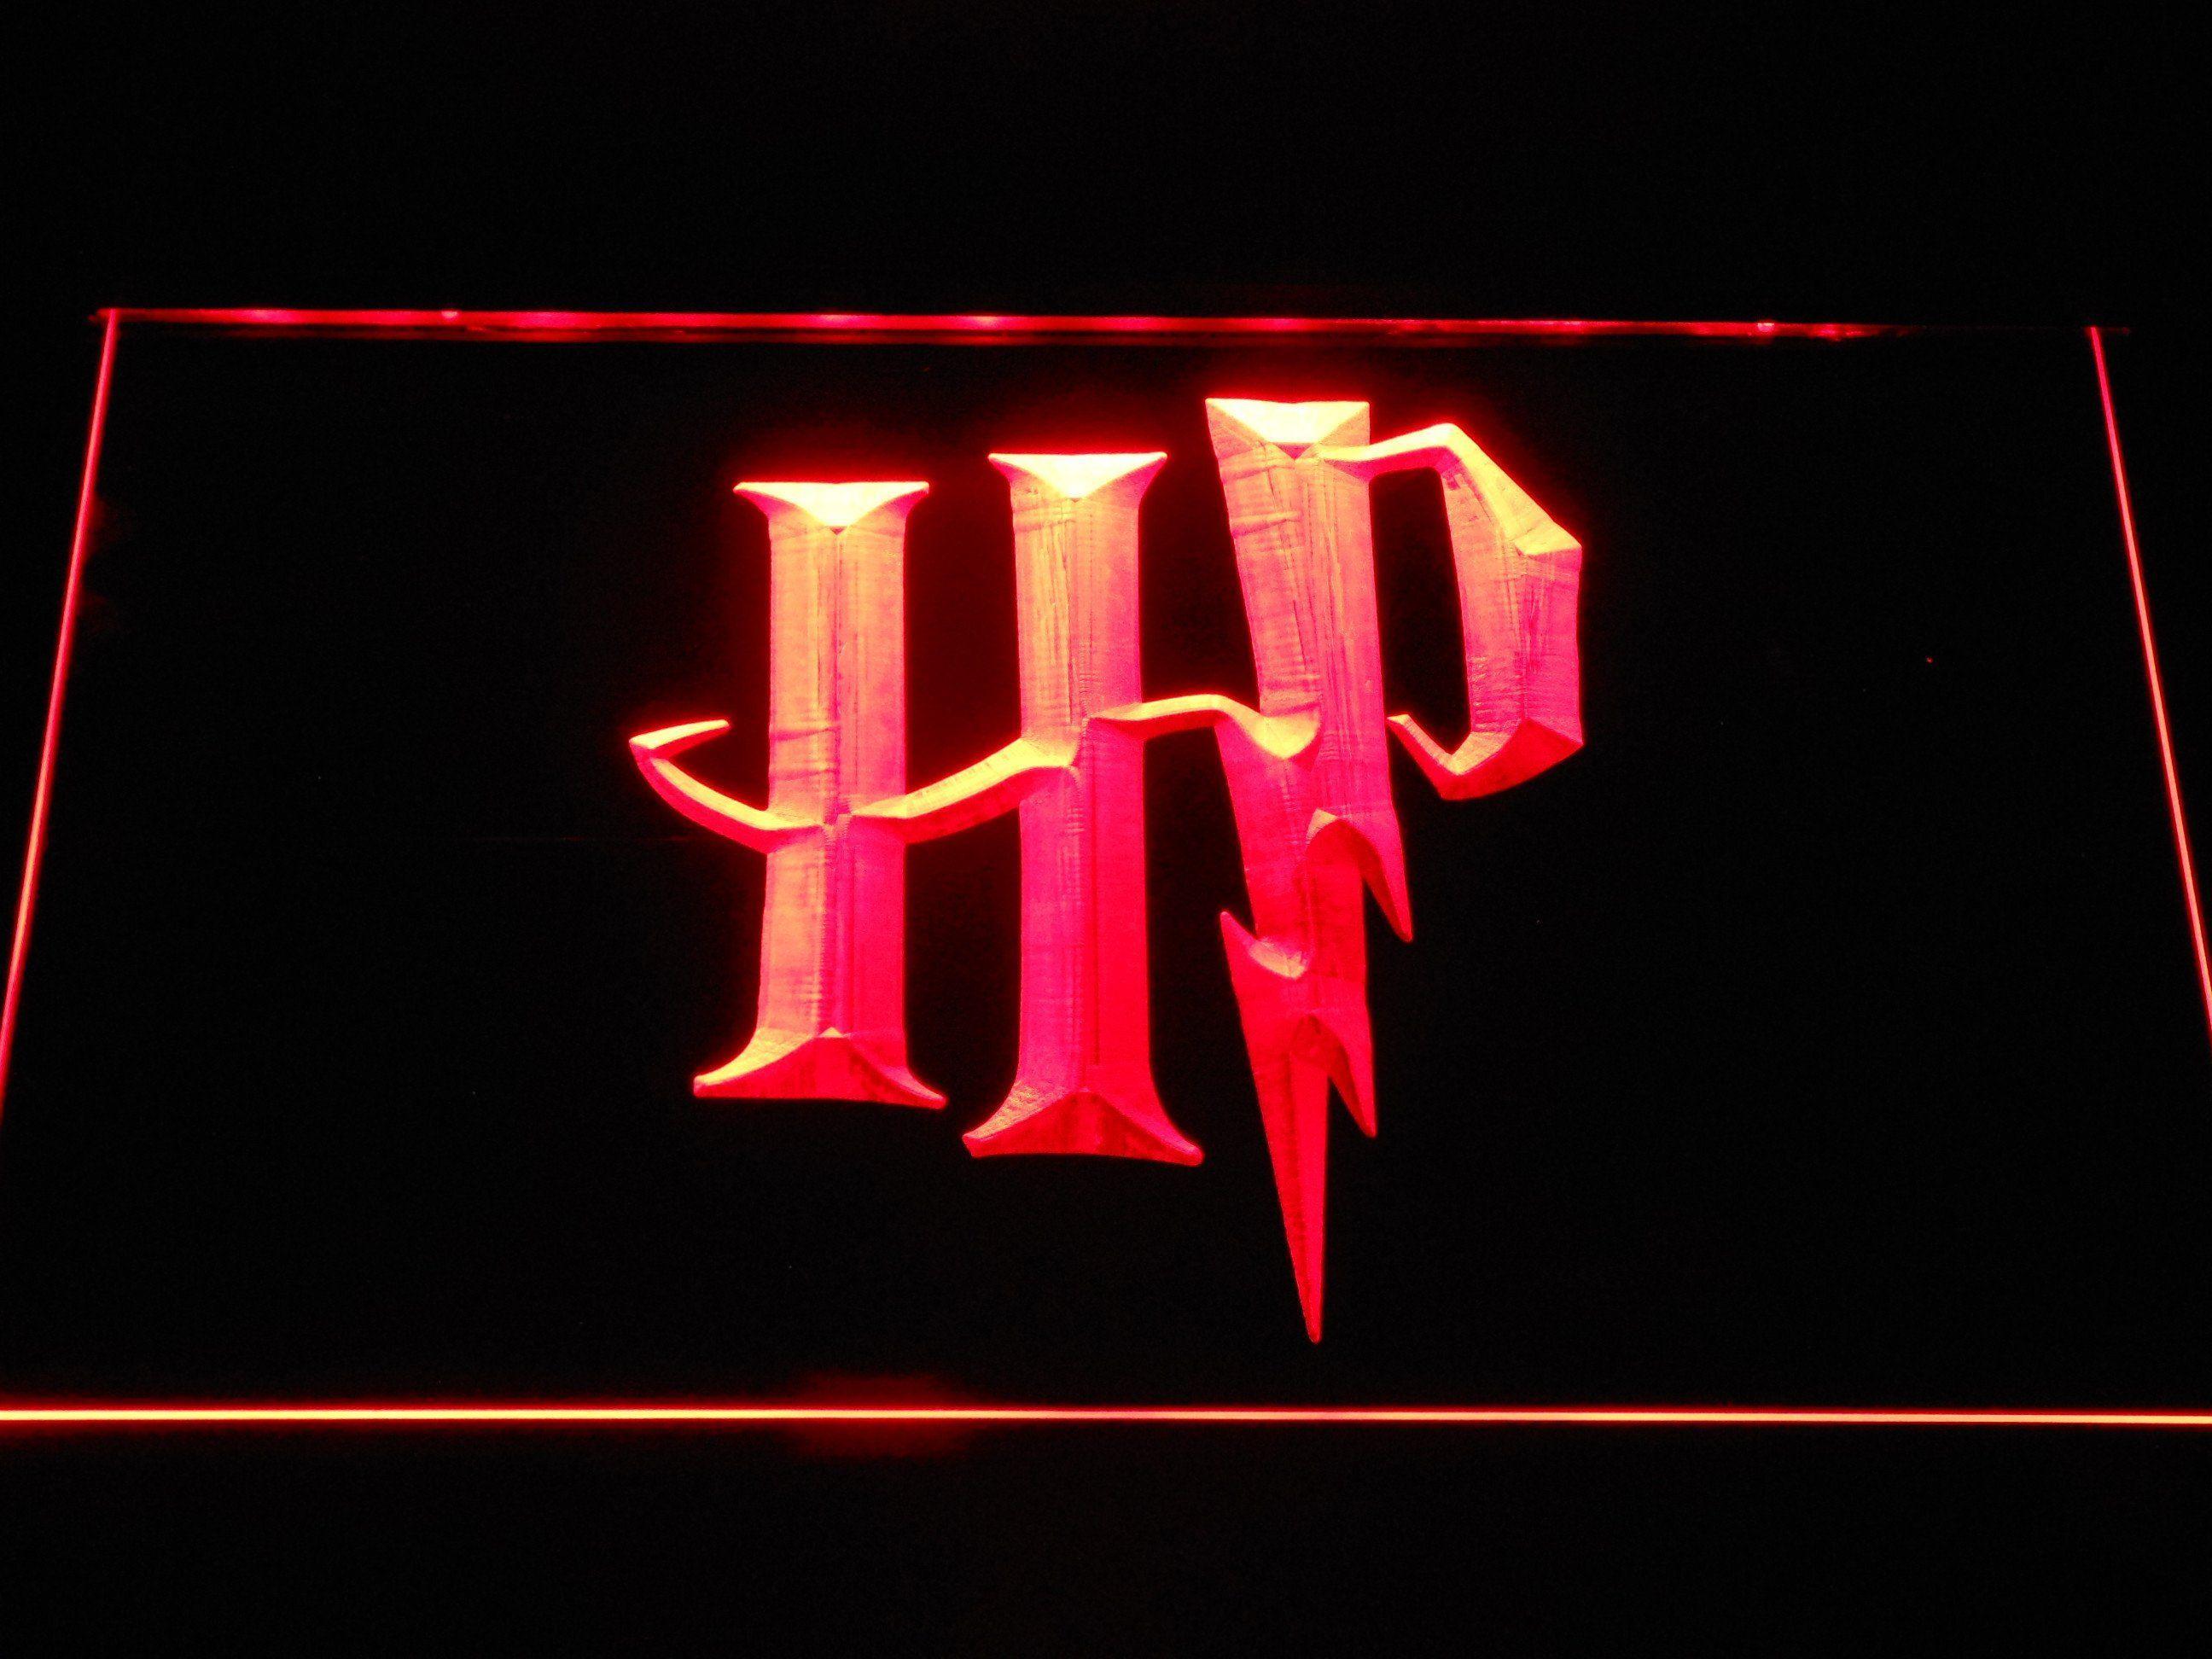 Cool HP Logo - Harry Potter HP Logo LED Neon Sign. Products. Led neon